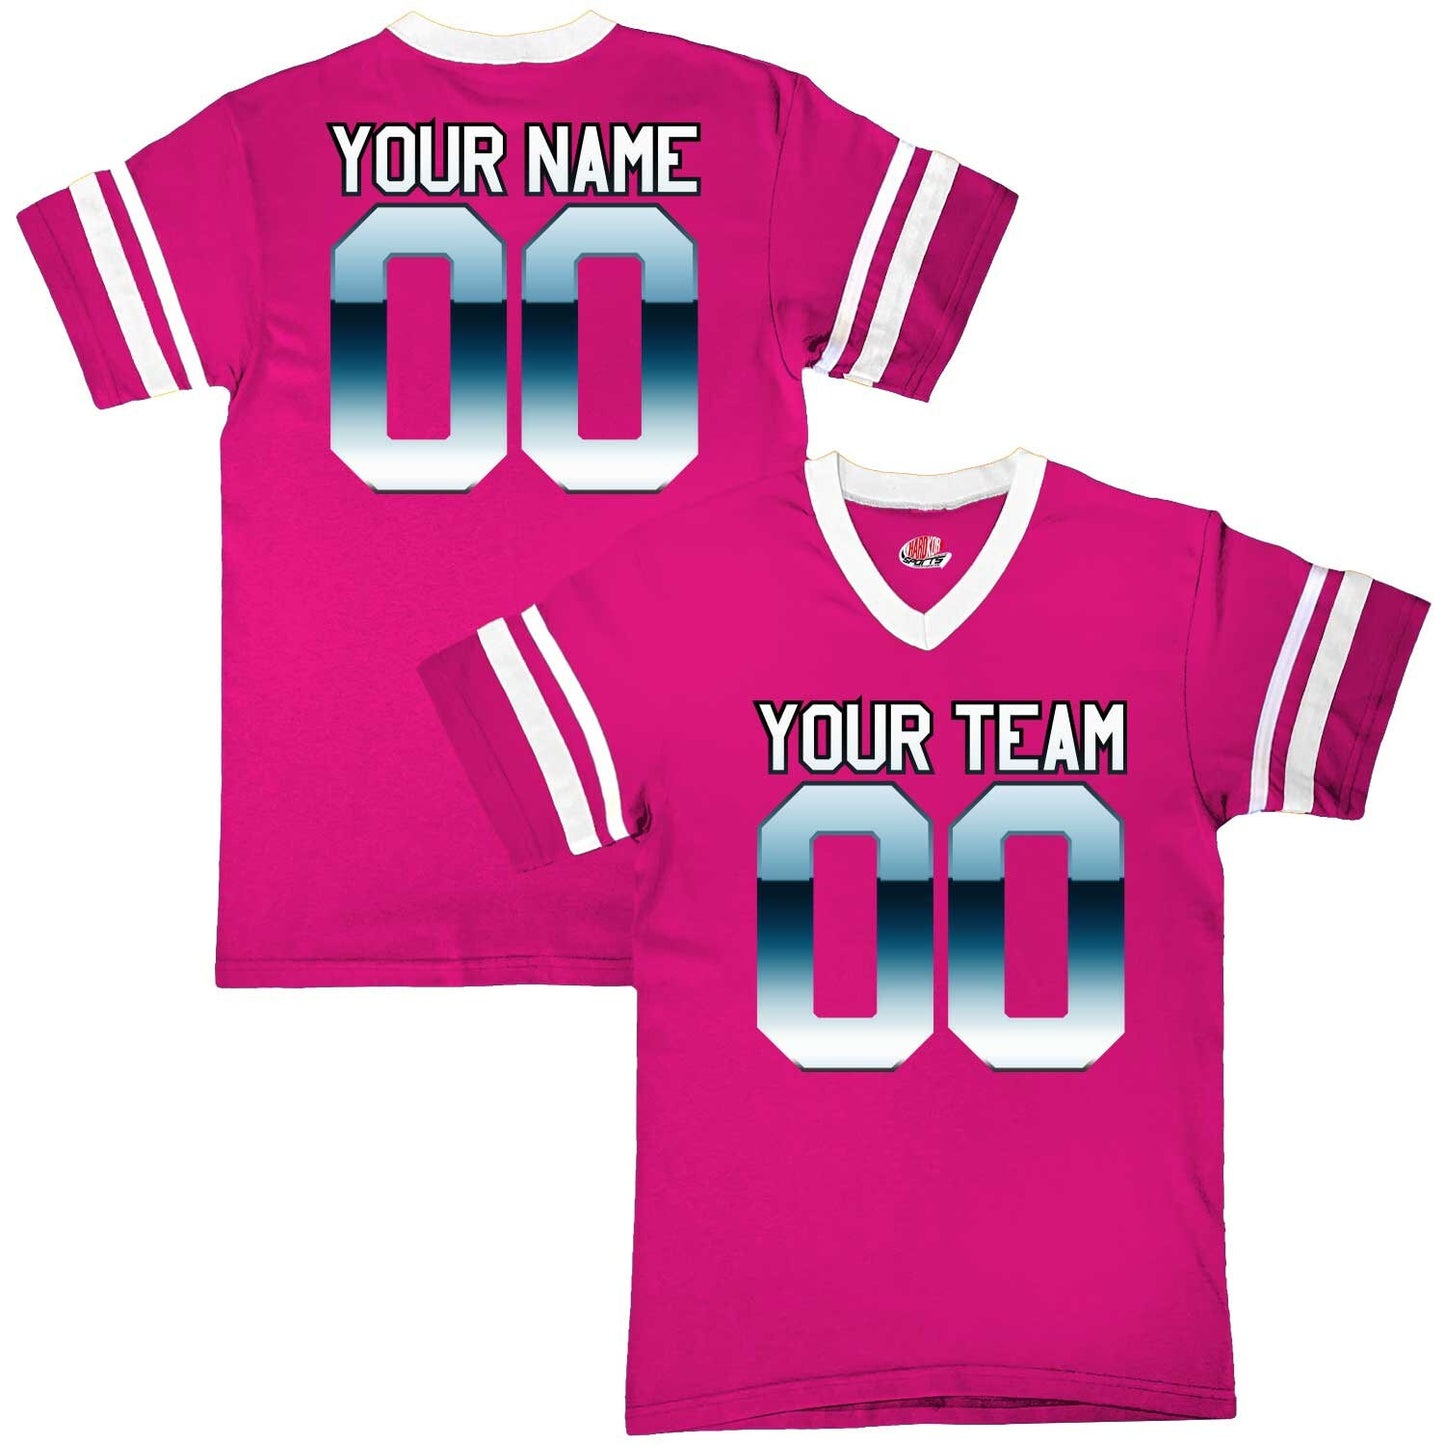 Stripe Sleeve Fan Wear Custom Football Jerseys with Chrome Print Design - includes Team Name, Player Name, Front and Back Player Number.